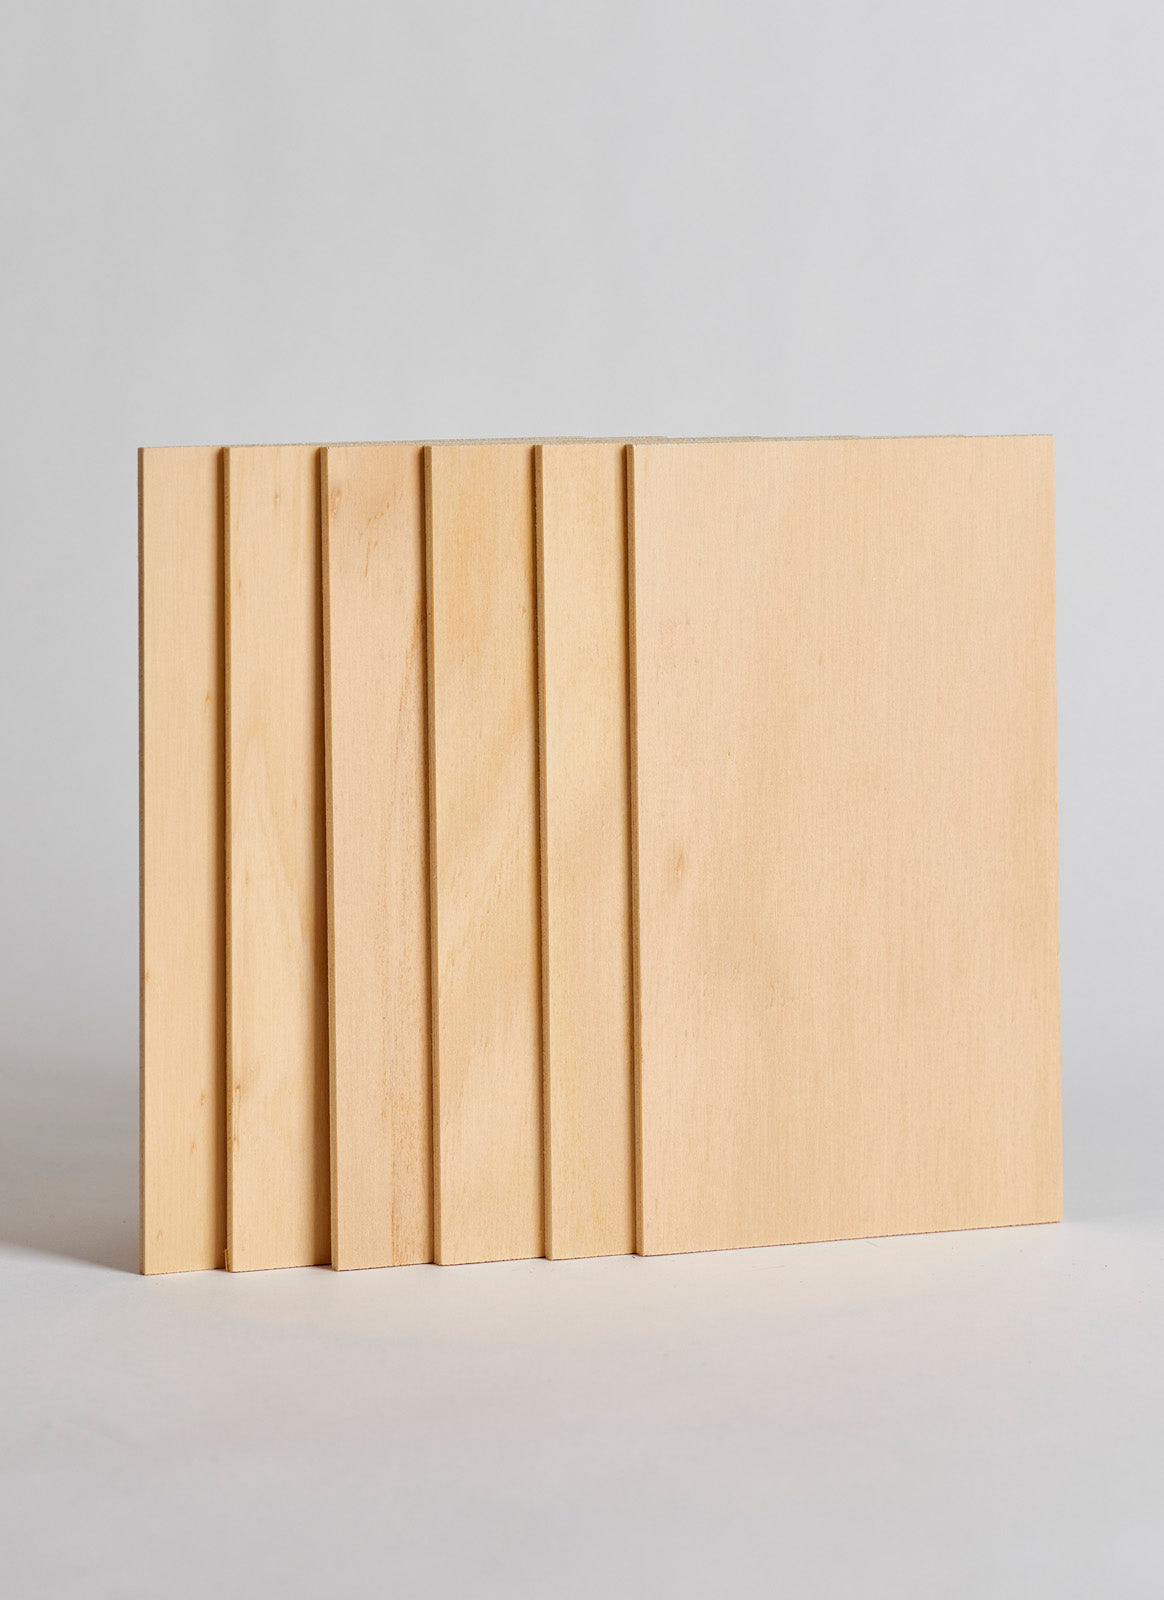 Plyco's 3mm Hoop Pine Laserply Craft Pack, containing six sheets, on a white background